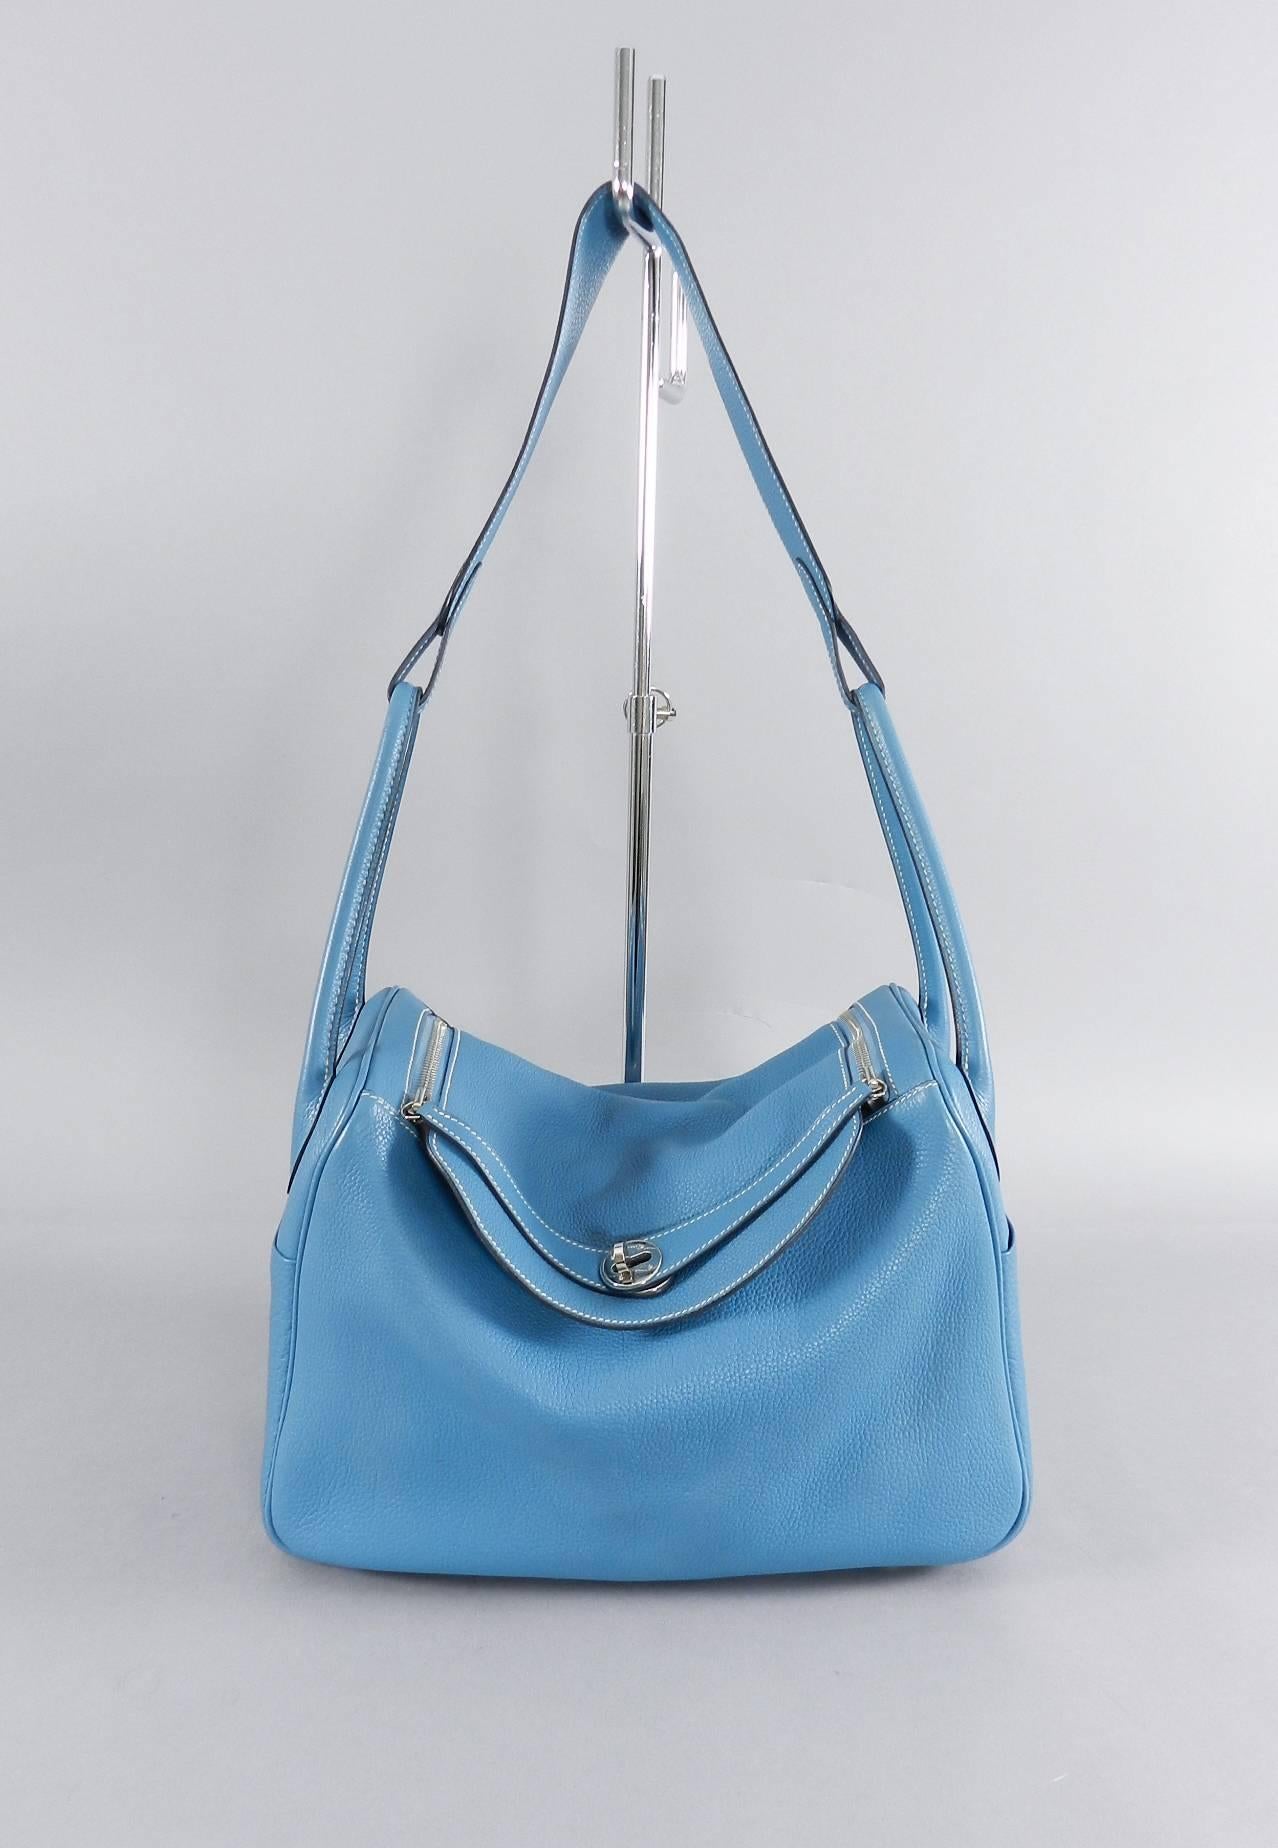 Hermes Blue Jean Clemence 34cm Lindy Bag.  Palladium hardware, date code L in square for year 2008.  Measures about 13.5 x 8 x 7